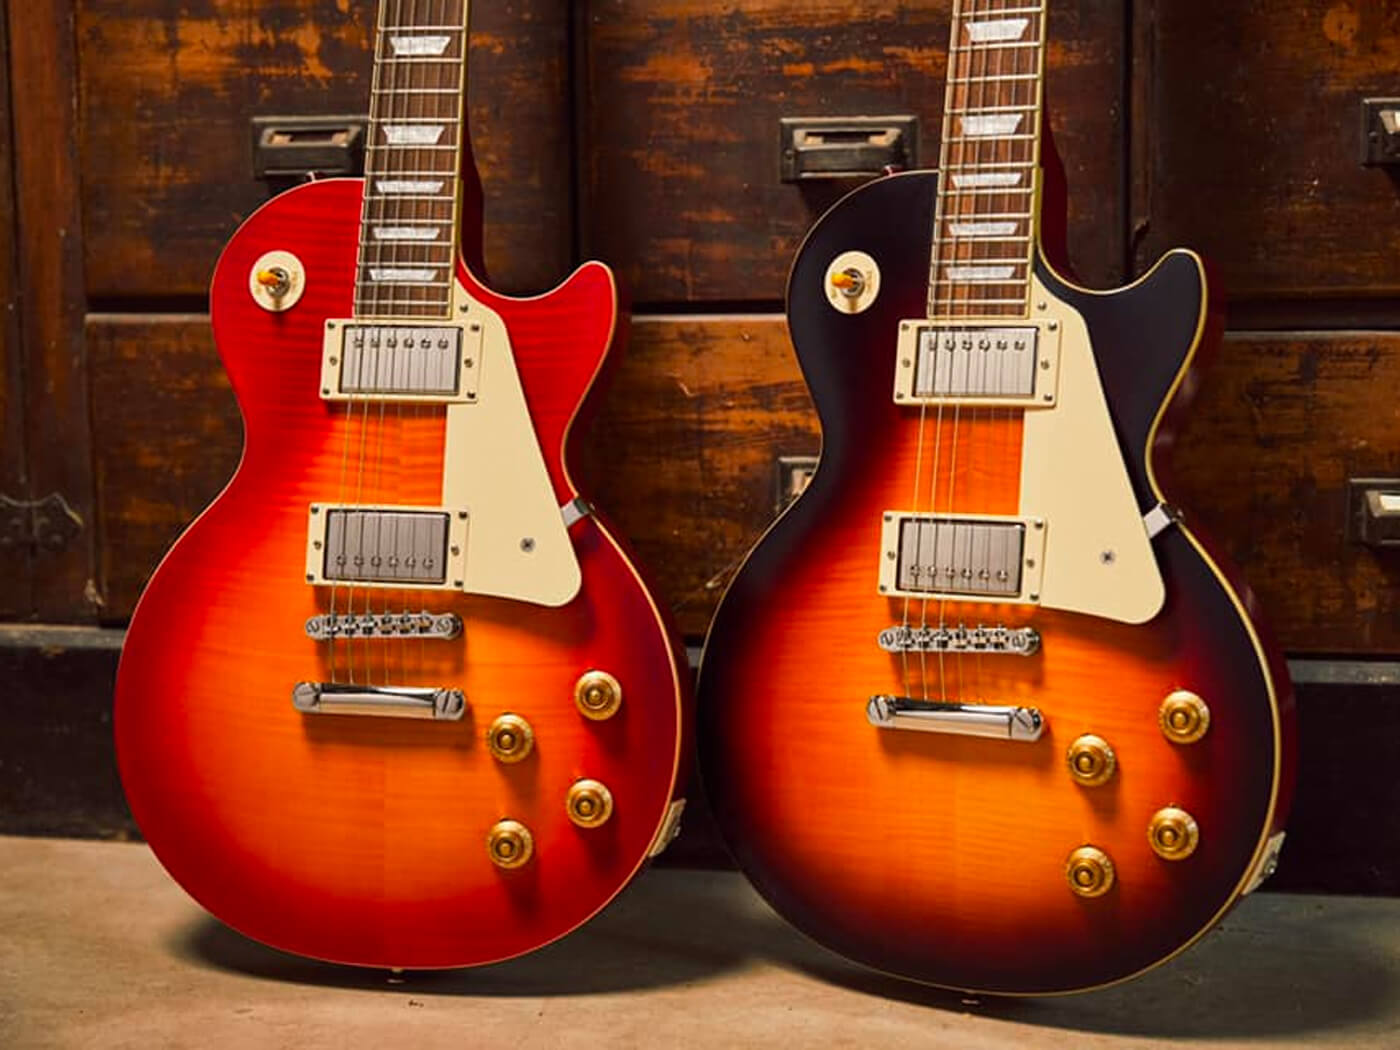 Epiphone's '59 Les Paul Standard might be the most affordable re